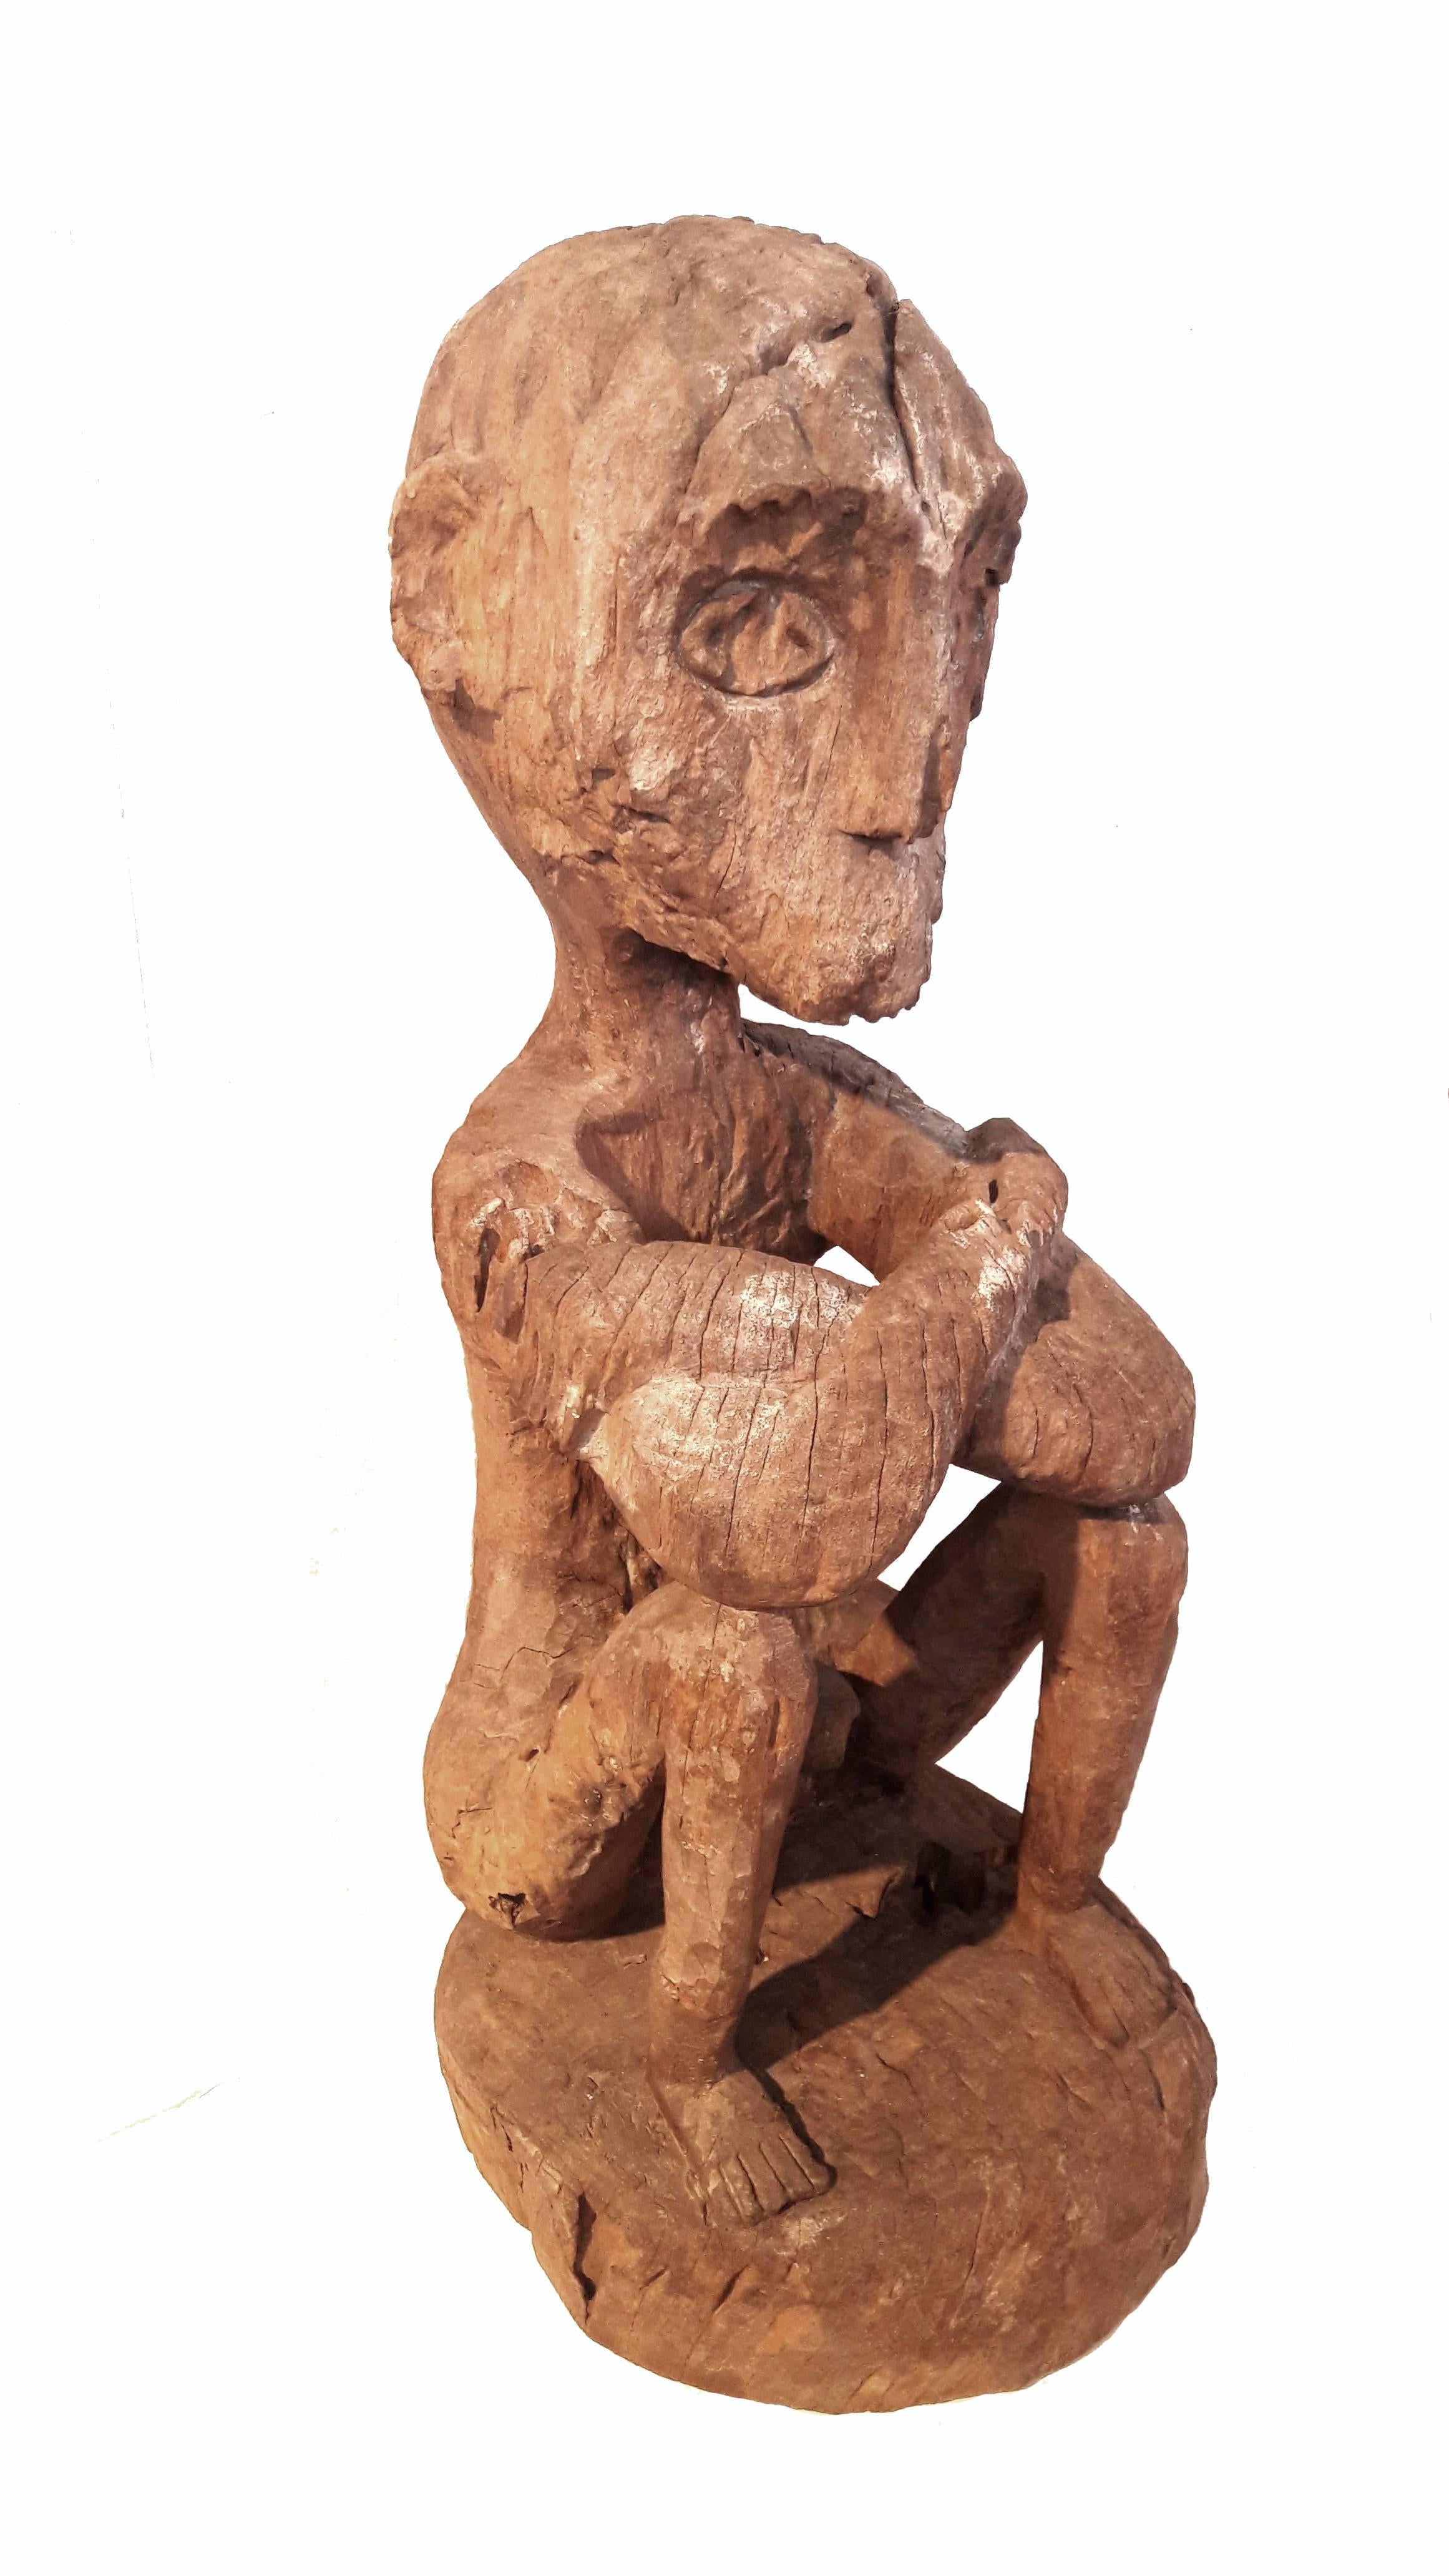 A traditional Benu'aq sculpture of a sitting man, from East Borneo. Carved from a single piece of  ironwood, circa 1920, this figure shows the erosion and patina according to its age and the distressed nature of the wood.